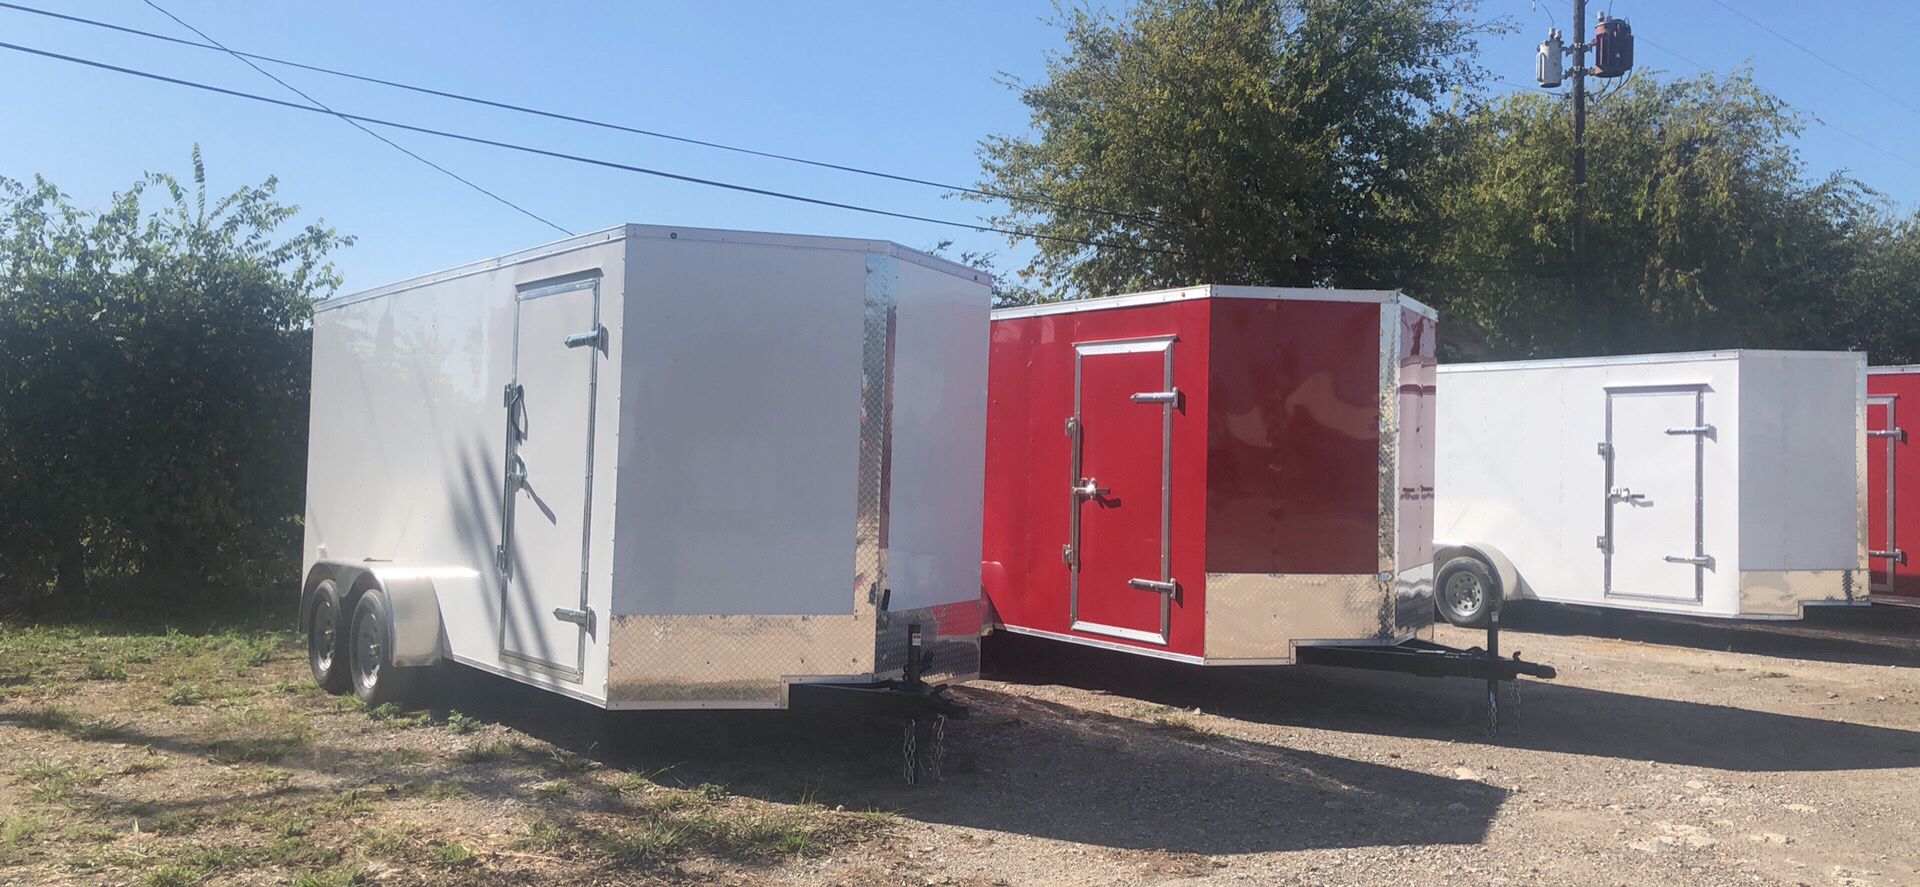 Enclosed trailers 2021 model 7x16